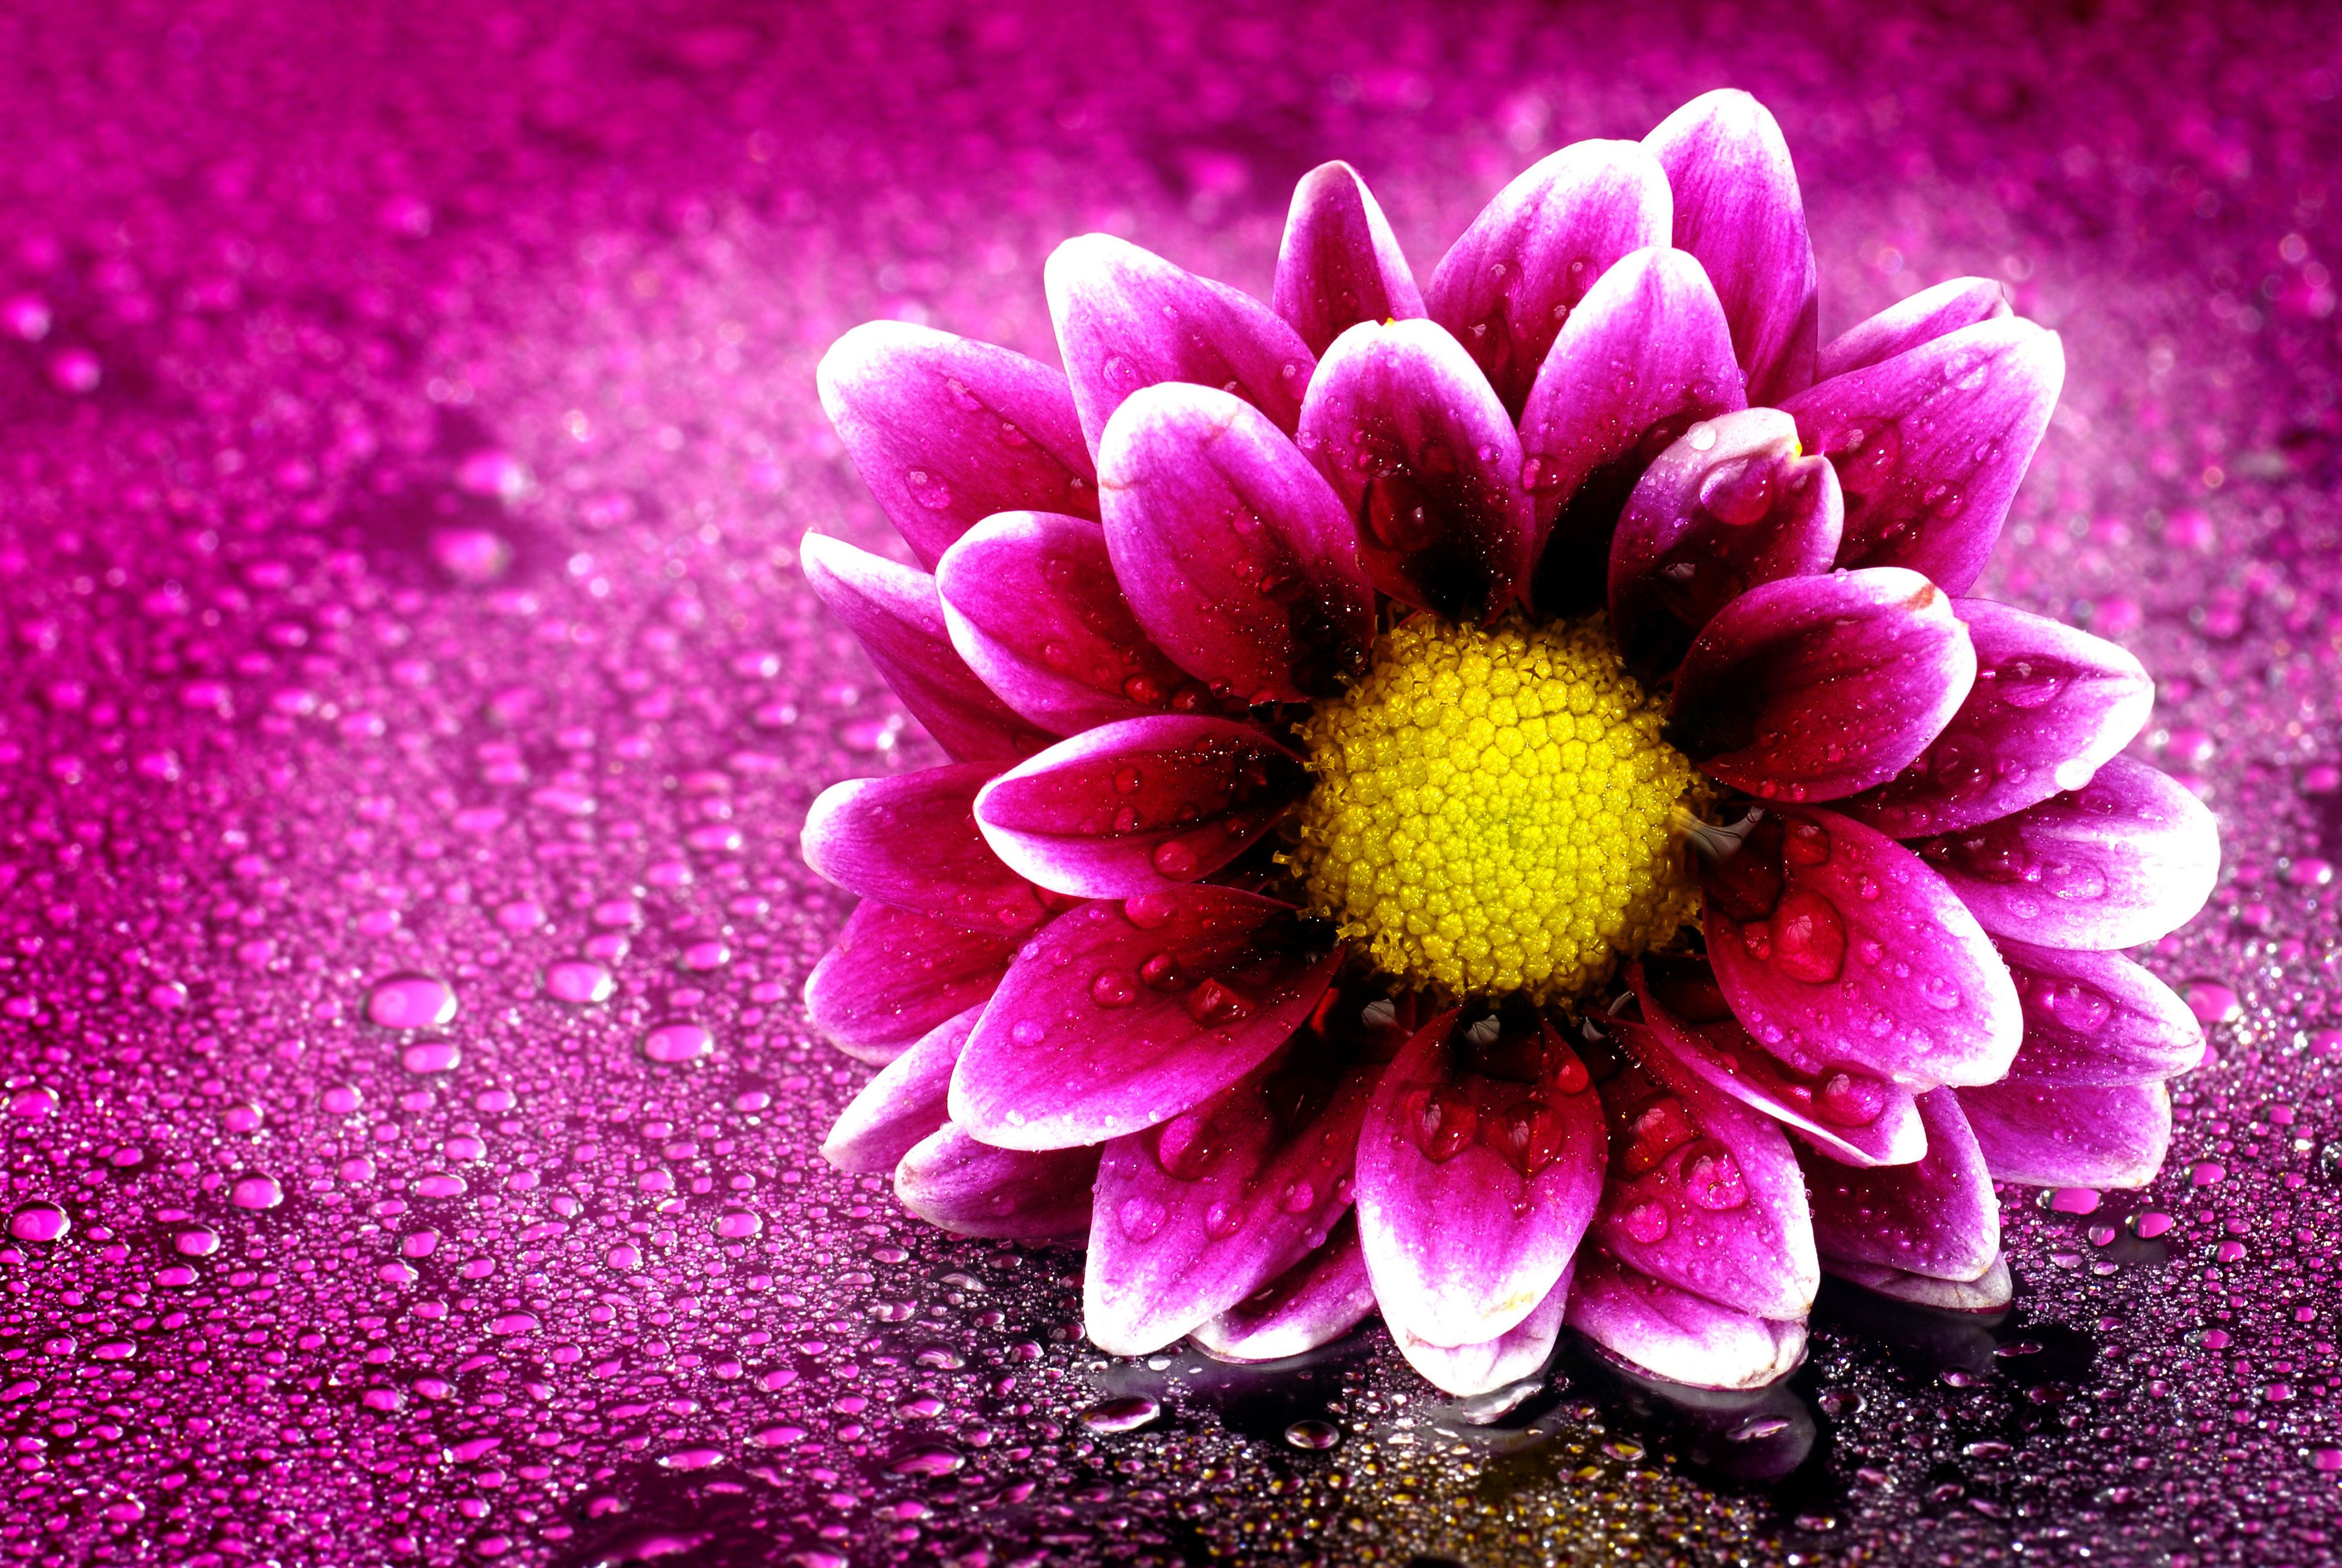 Floral Ultra HD Wallpaper Free Floral Ultra HD Background